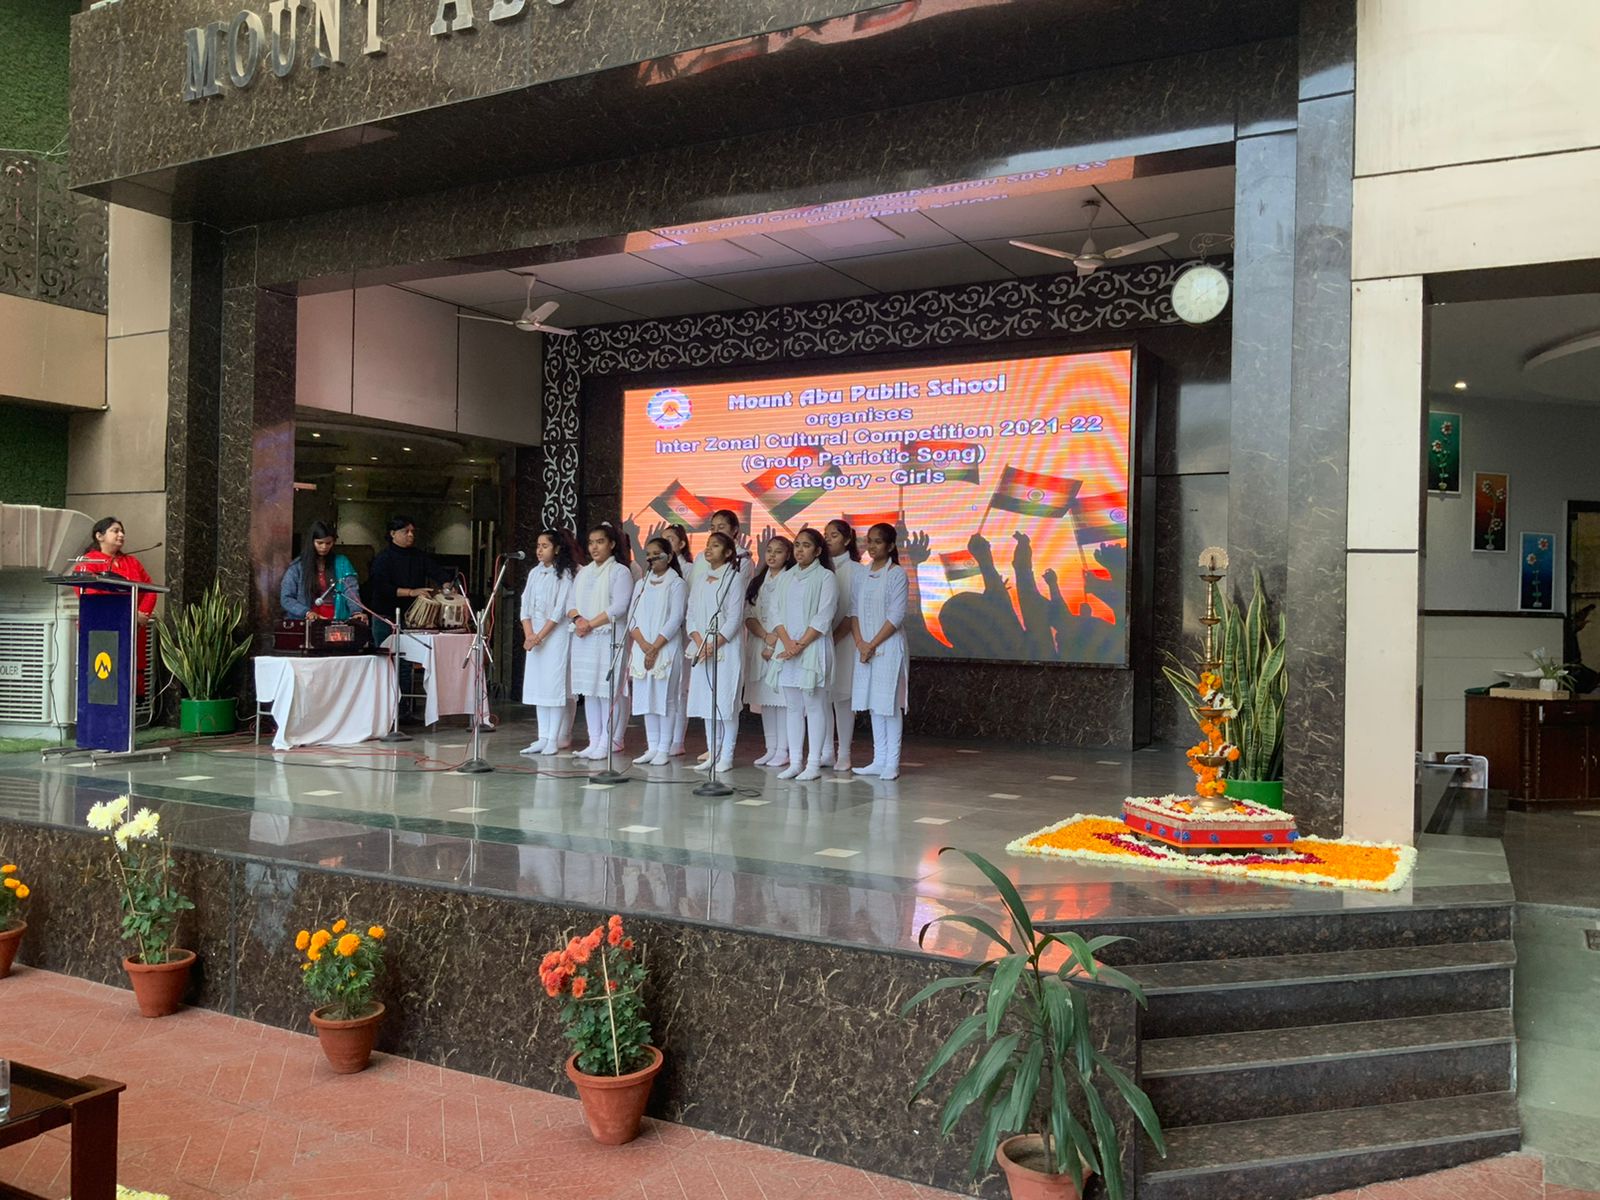 INTER ZONAL PATRIOTIC SONG COMPETITION